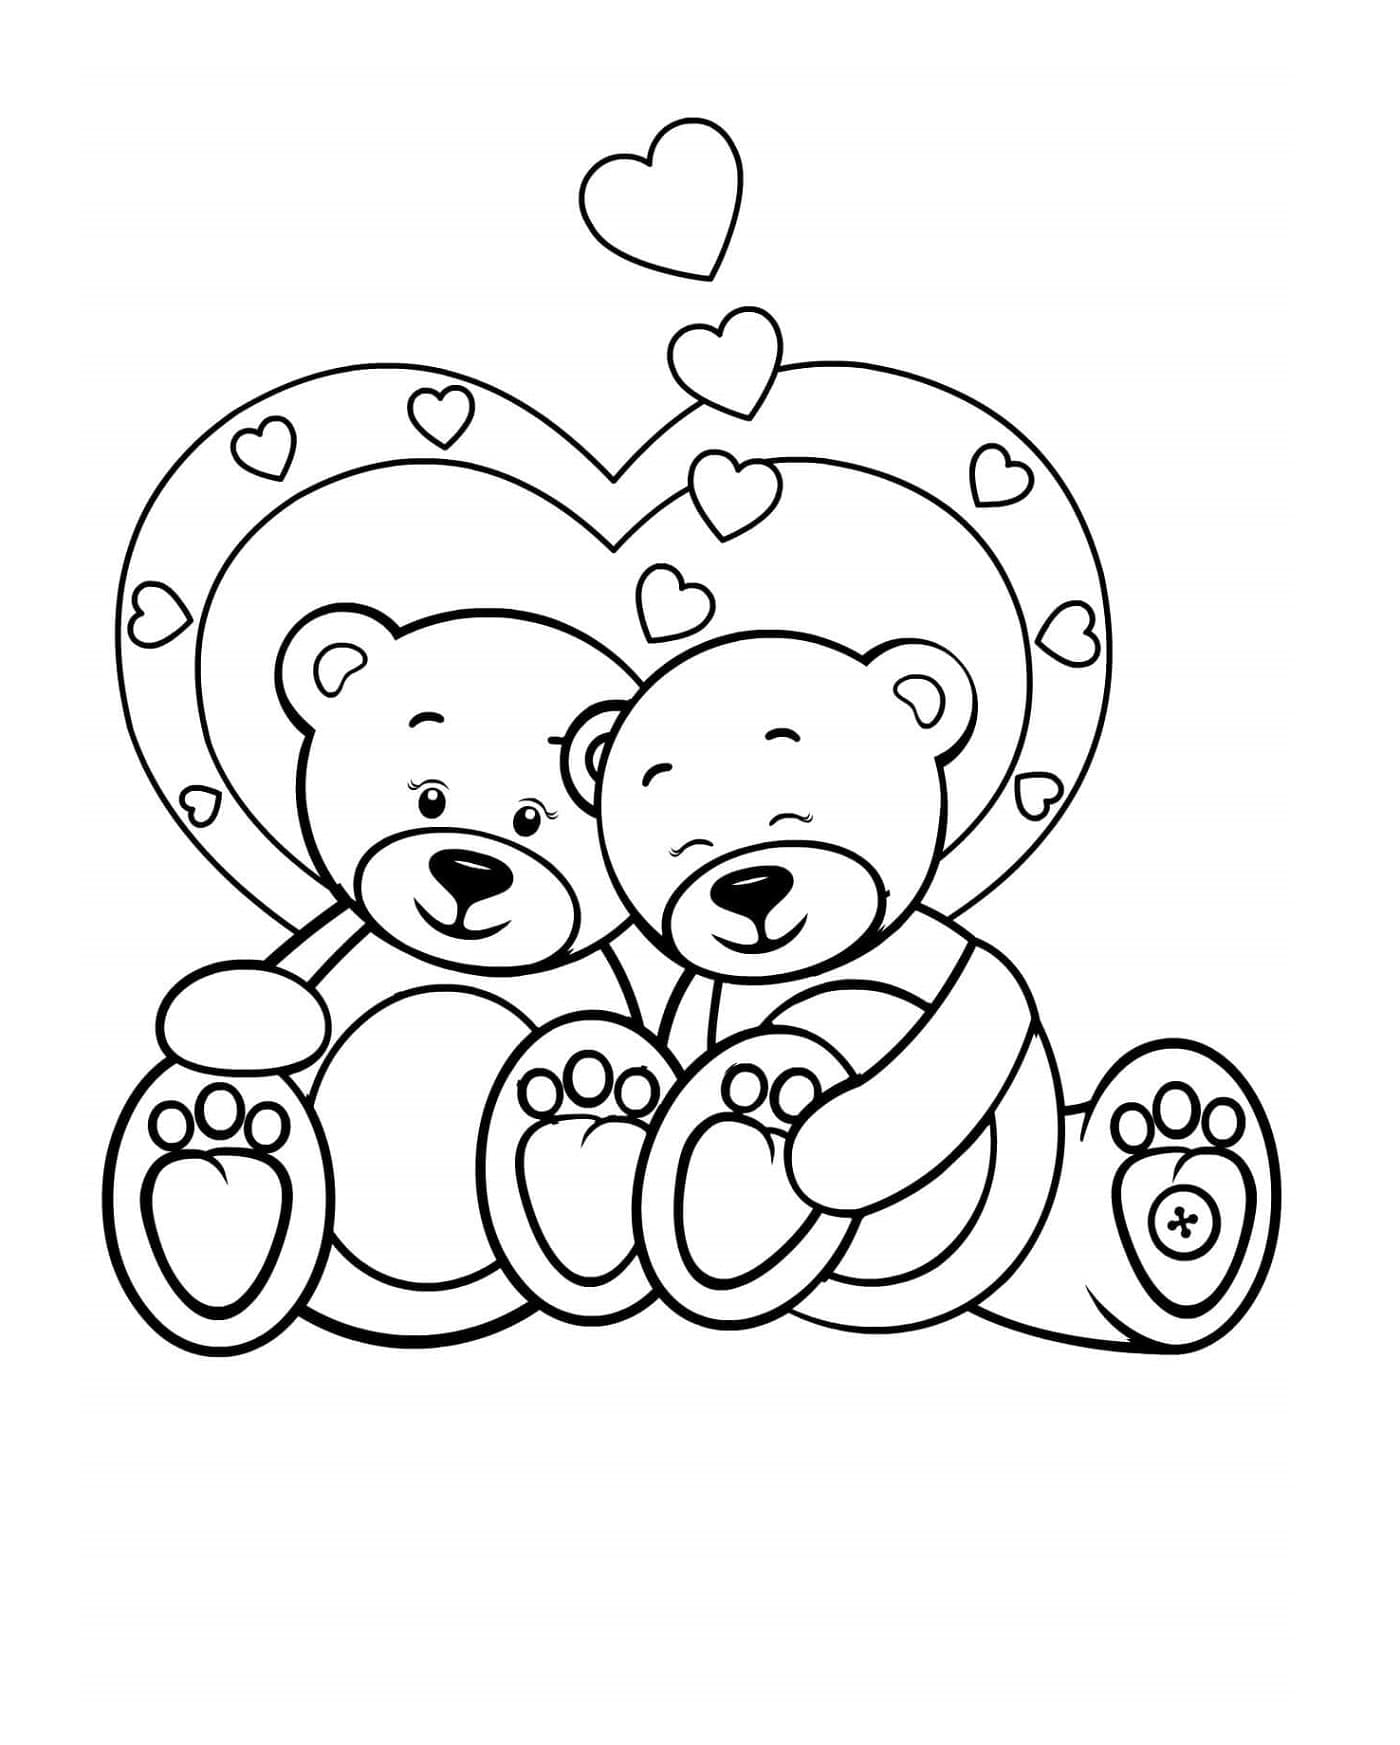 Printable Two Teddy Bear In Valentine Coloring Page